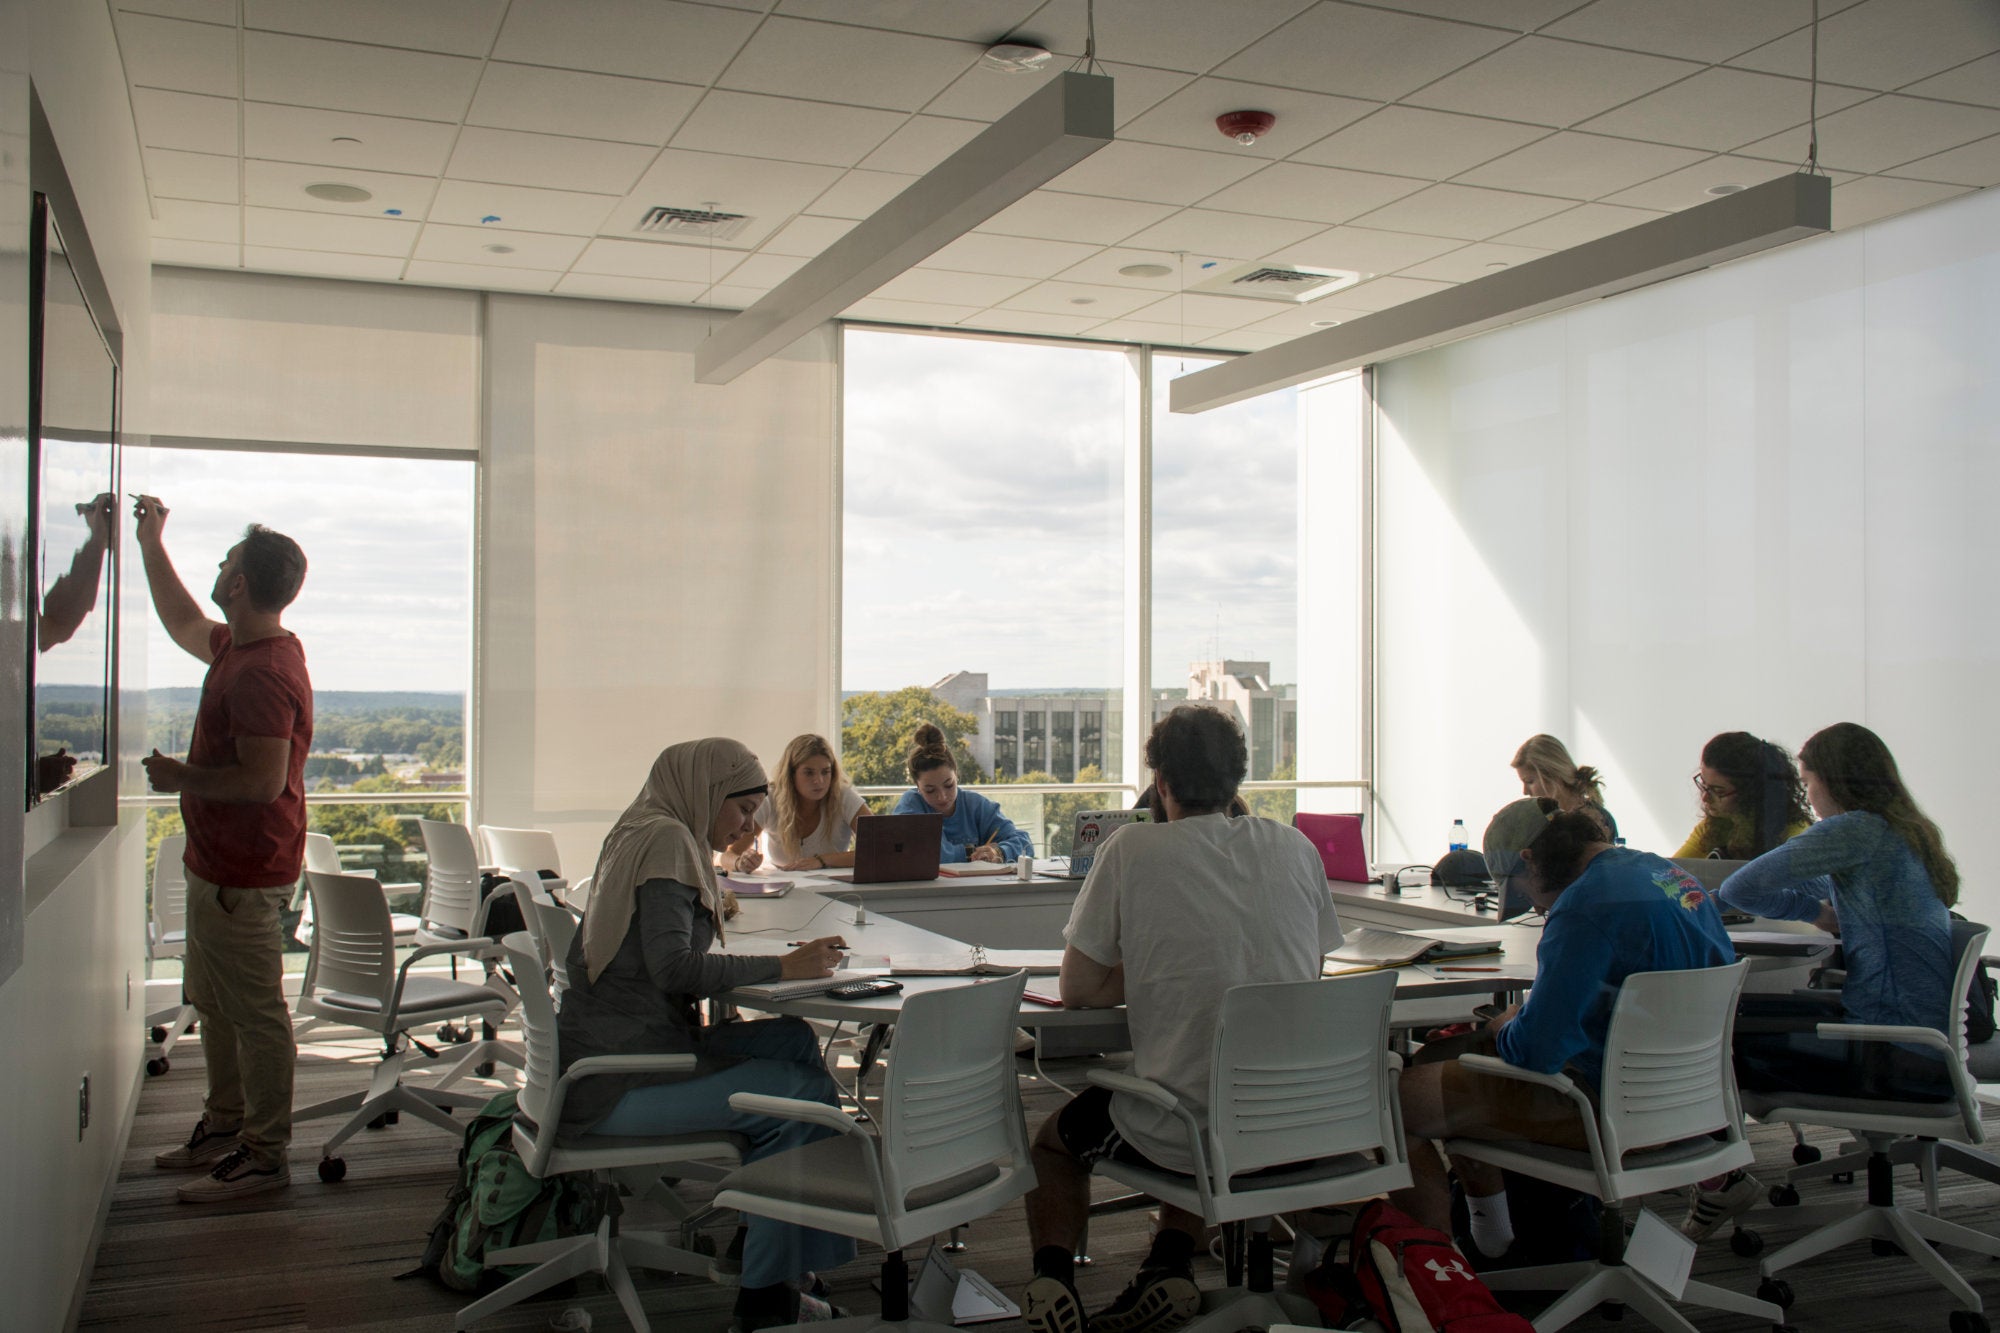 Students and their professor gathered for class in the new engineering facility